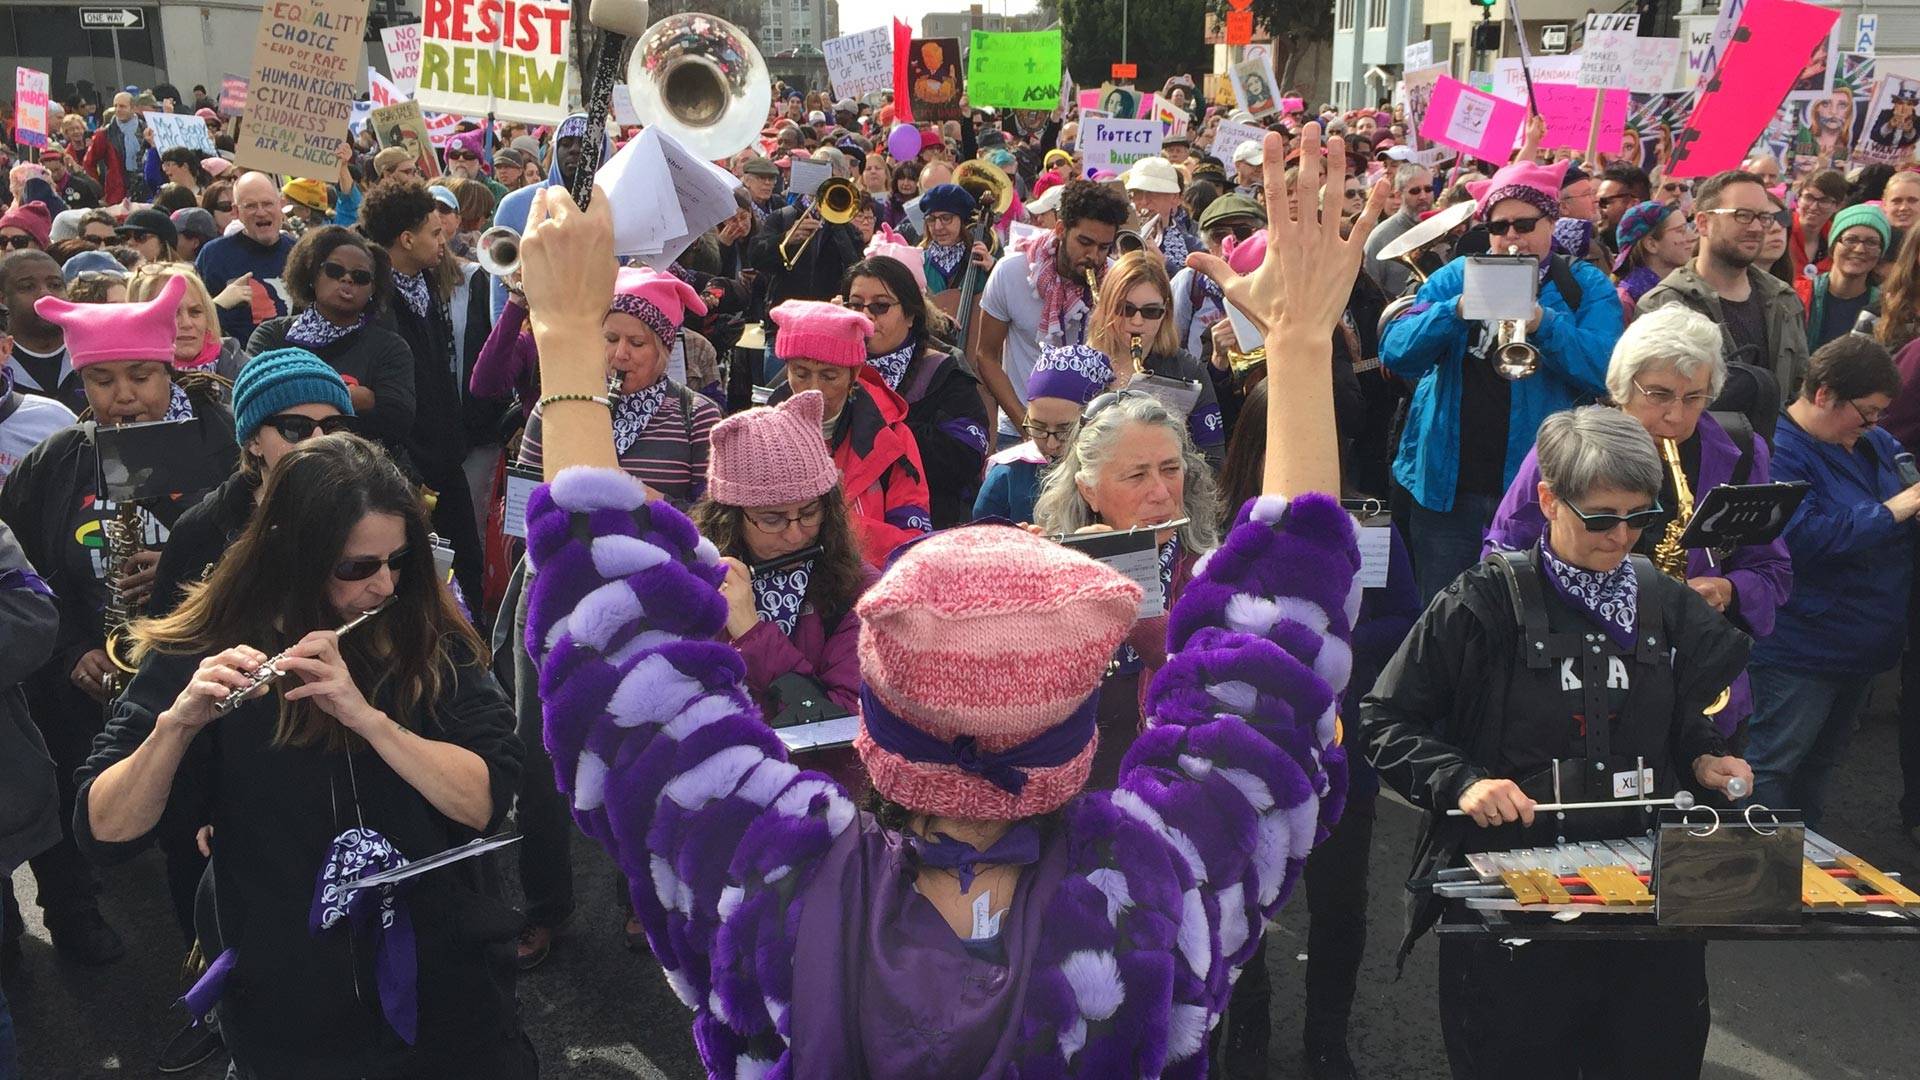 The Nasty Woman Band keeps spirits up with music at the Women's March in Oakland, Jan. 21, 2017. Gabe Meline/KQED